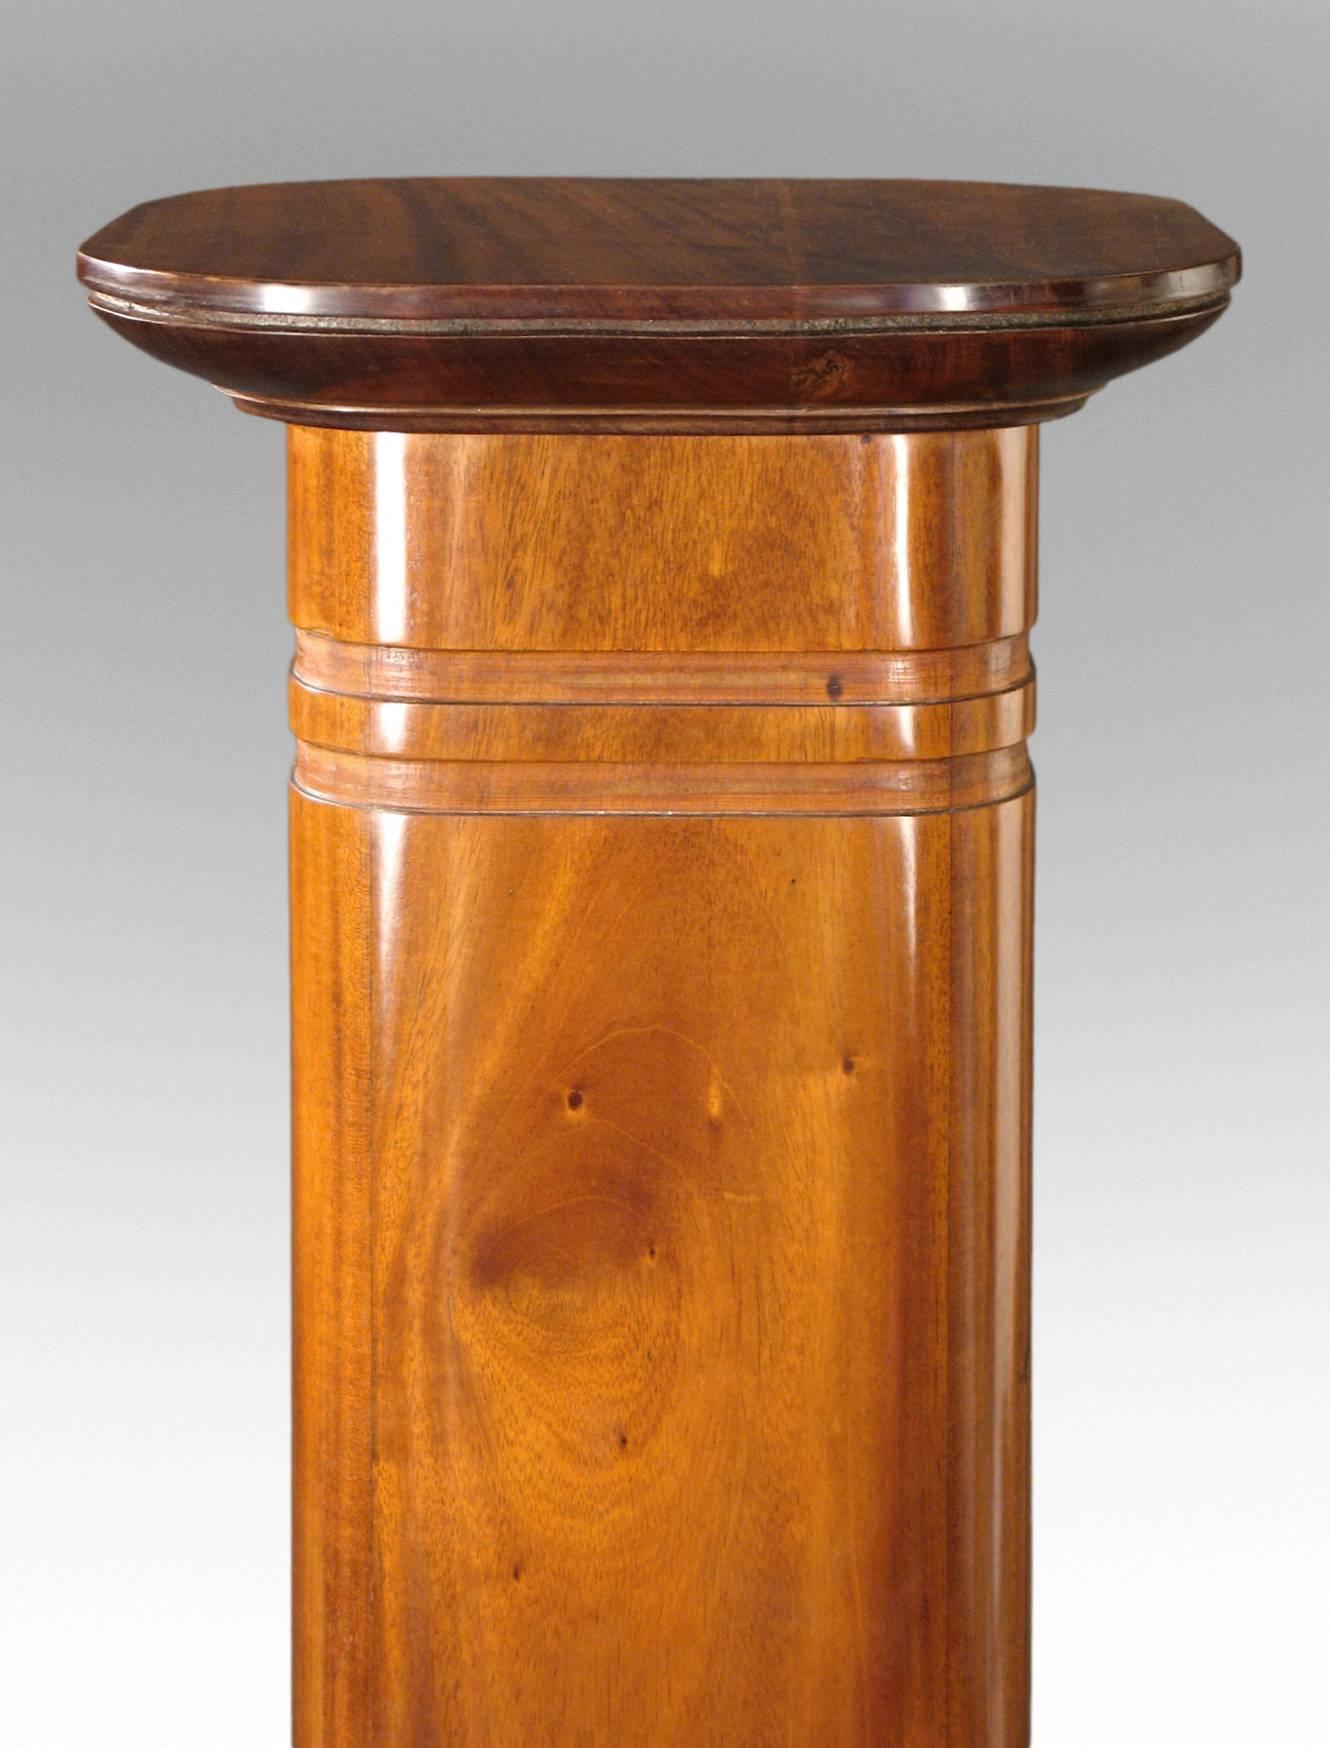 Refined, elegant and beautifully crafted of a golden mahogany. The square column with rounded corners and incised bands, surmounted by a cornice and raised on a molded base.

In very good condition, expertly restored, polished, wonderful color,